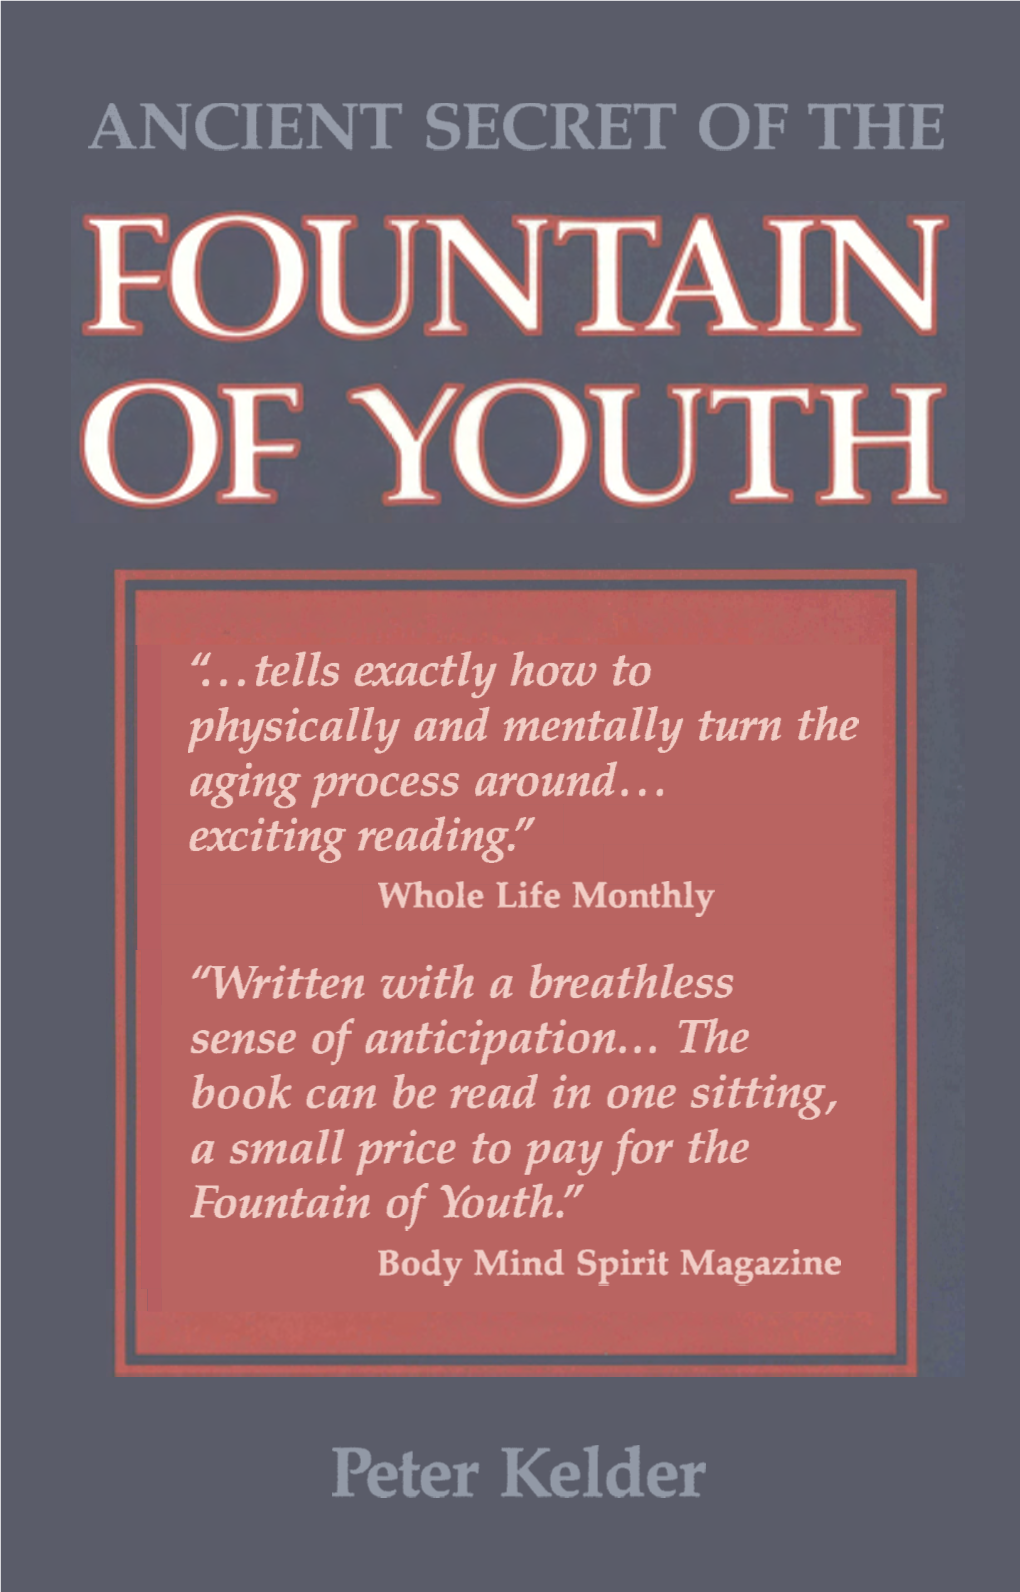 The Ancient Secret of the Fountain of Youth by Peter Kelder